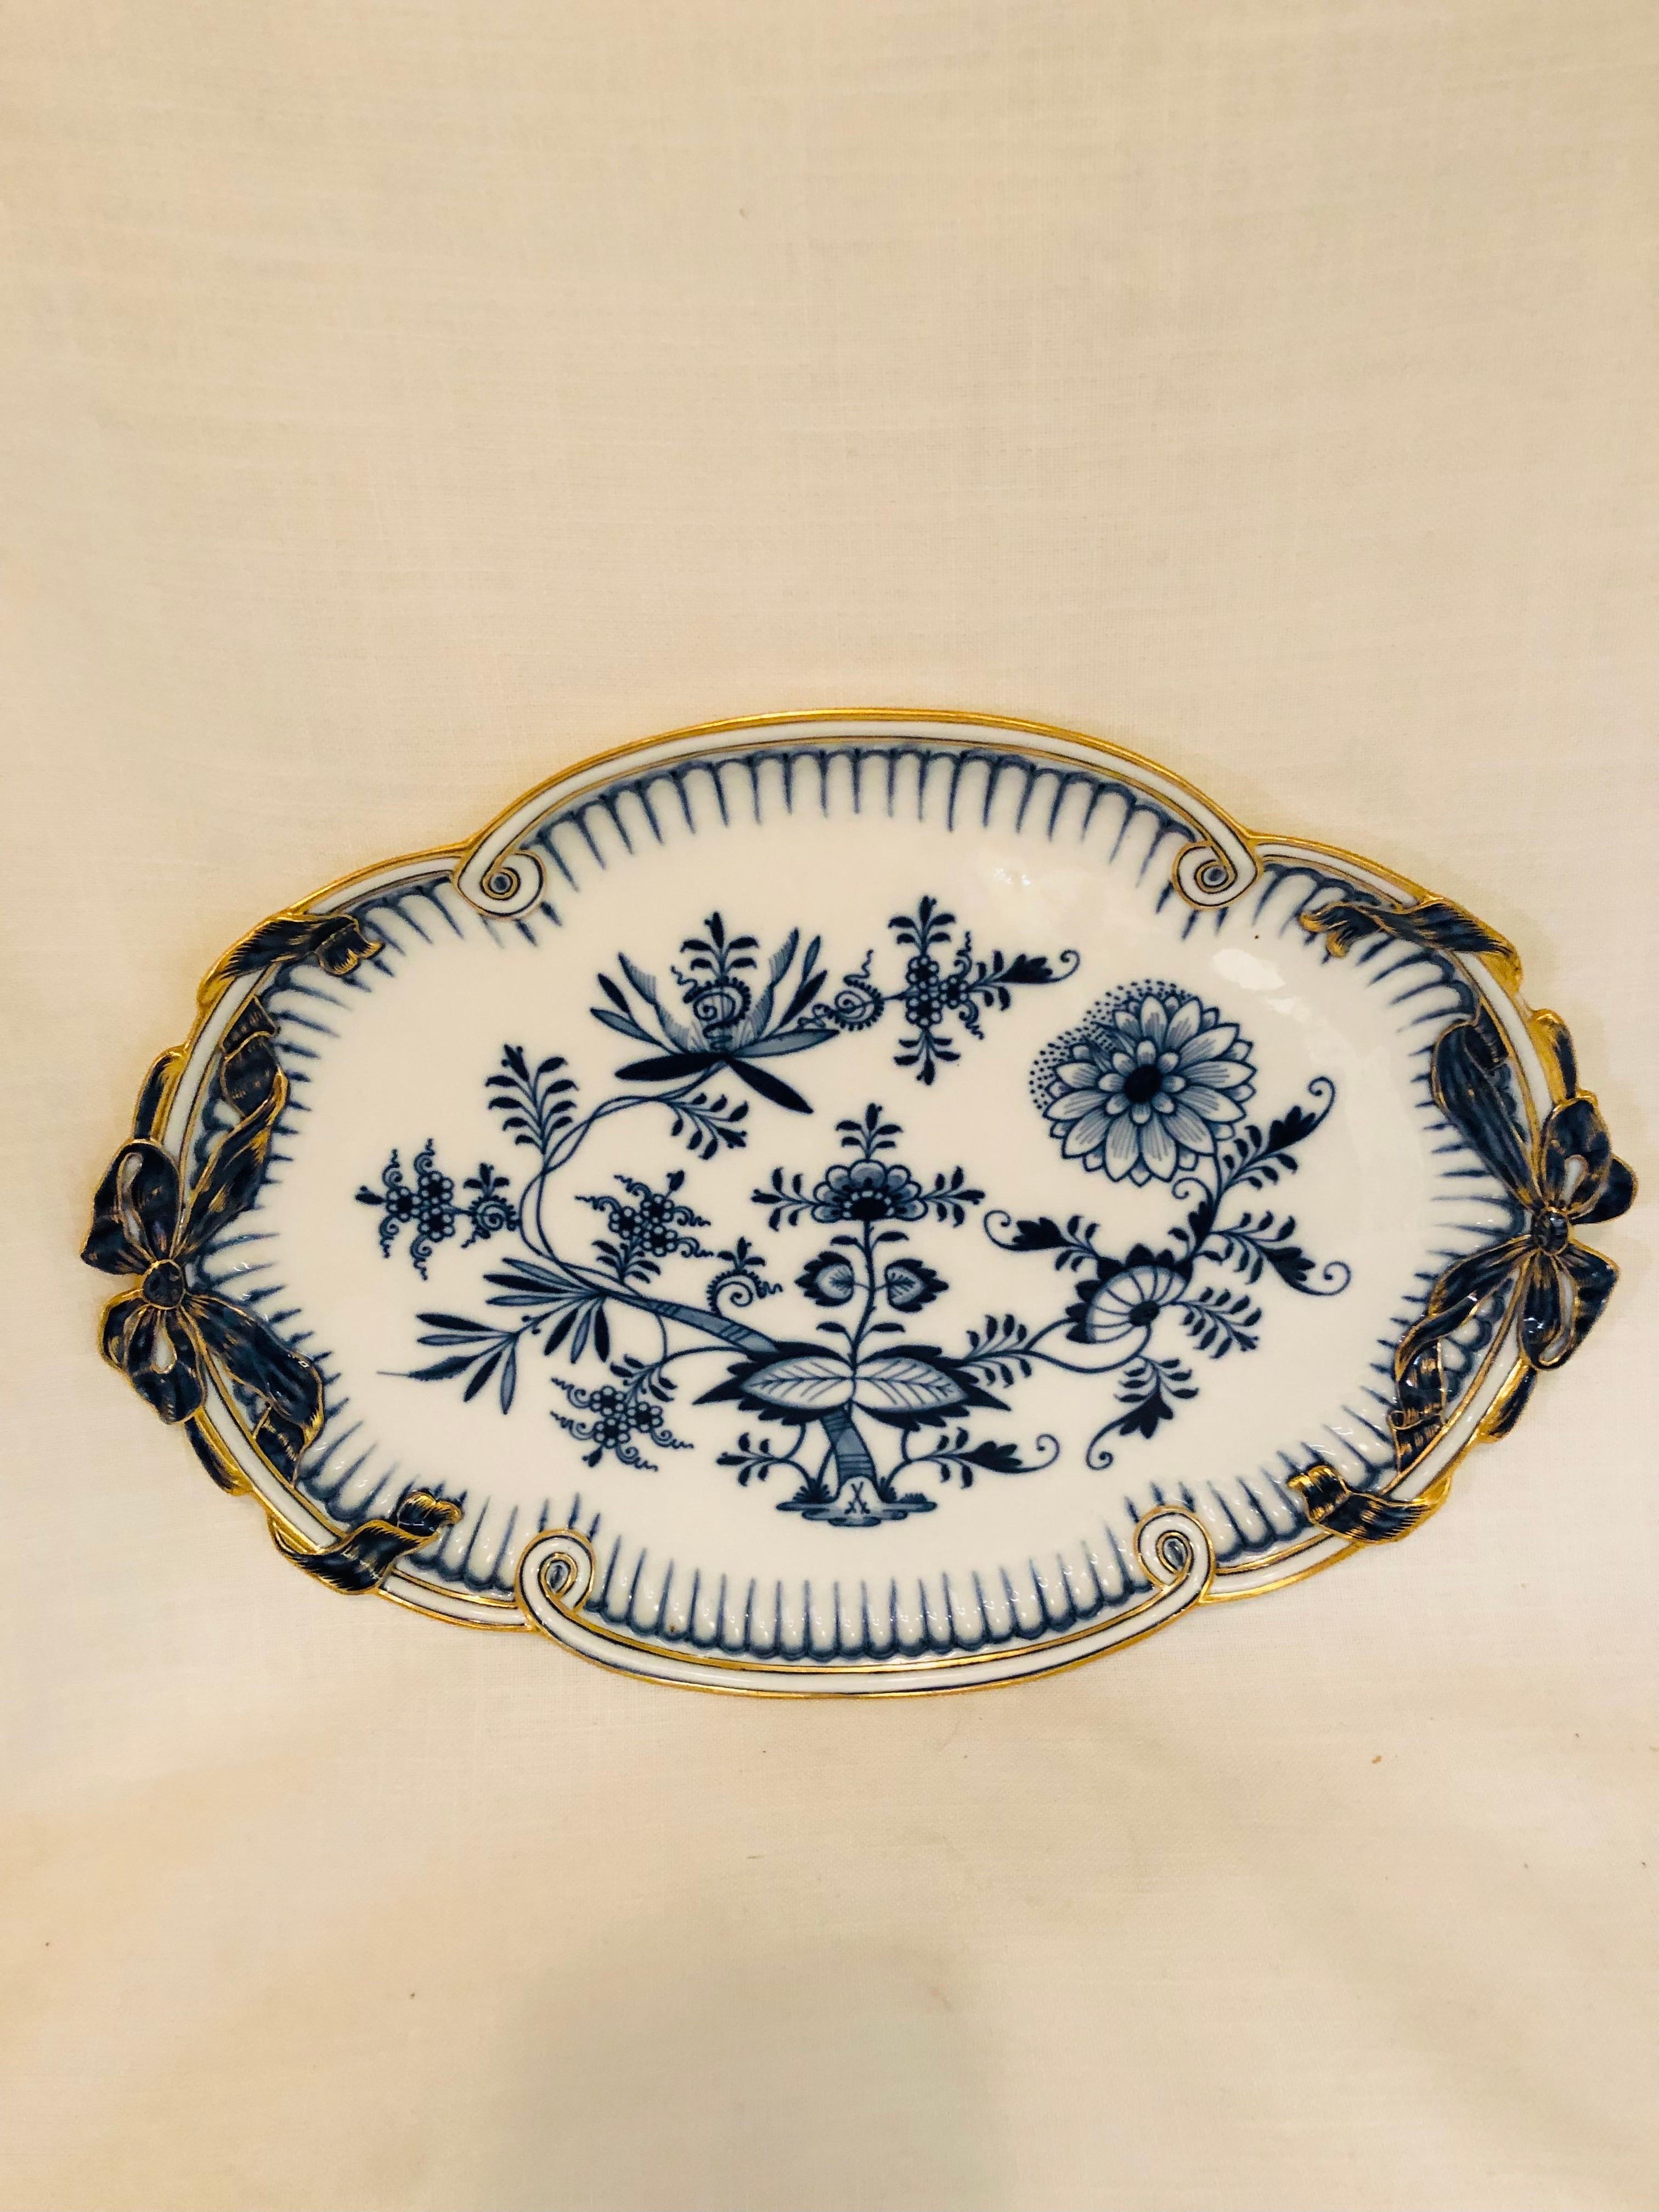 This is a stunning Meissen blue onion serving tray with a gold border and handles in the shape of bows. It is 16 by 11.5 inches. It would be a perfect tray to serve petits fours, tea sandwiches, cookies or pastries. It would also be a perfect tray